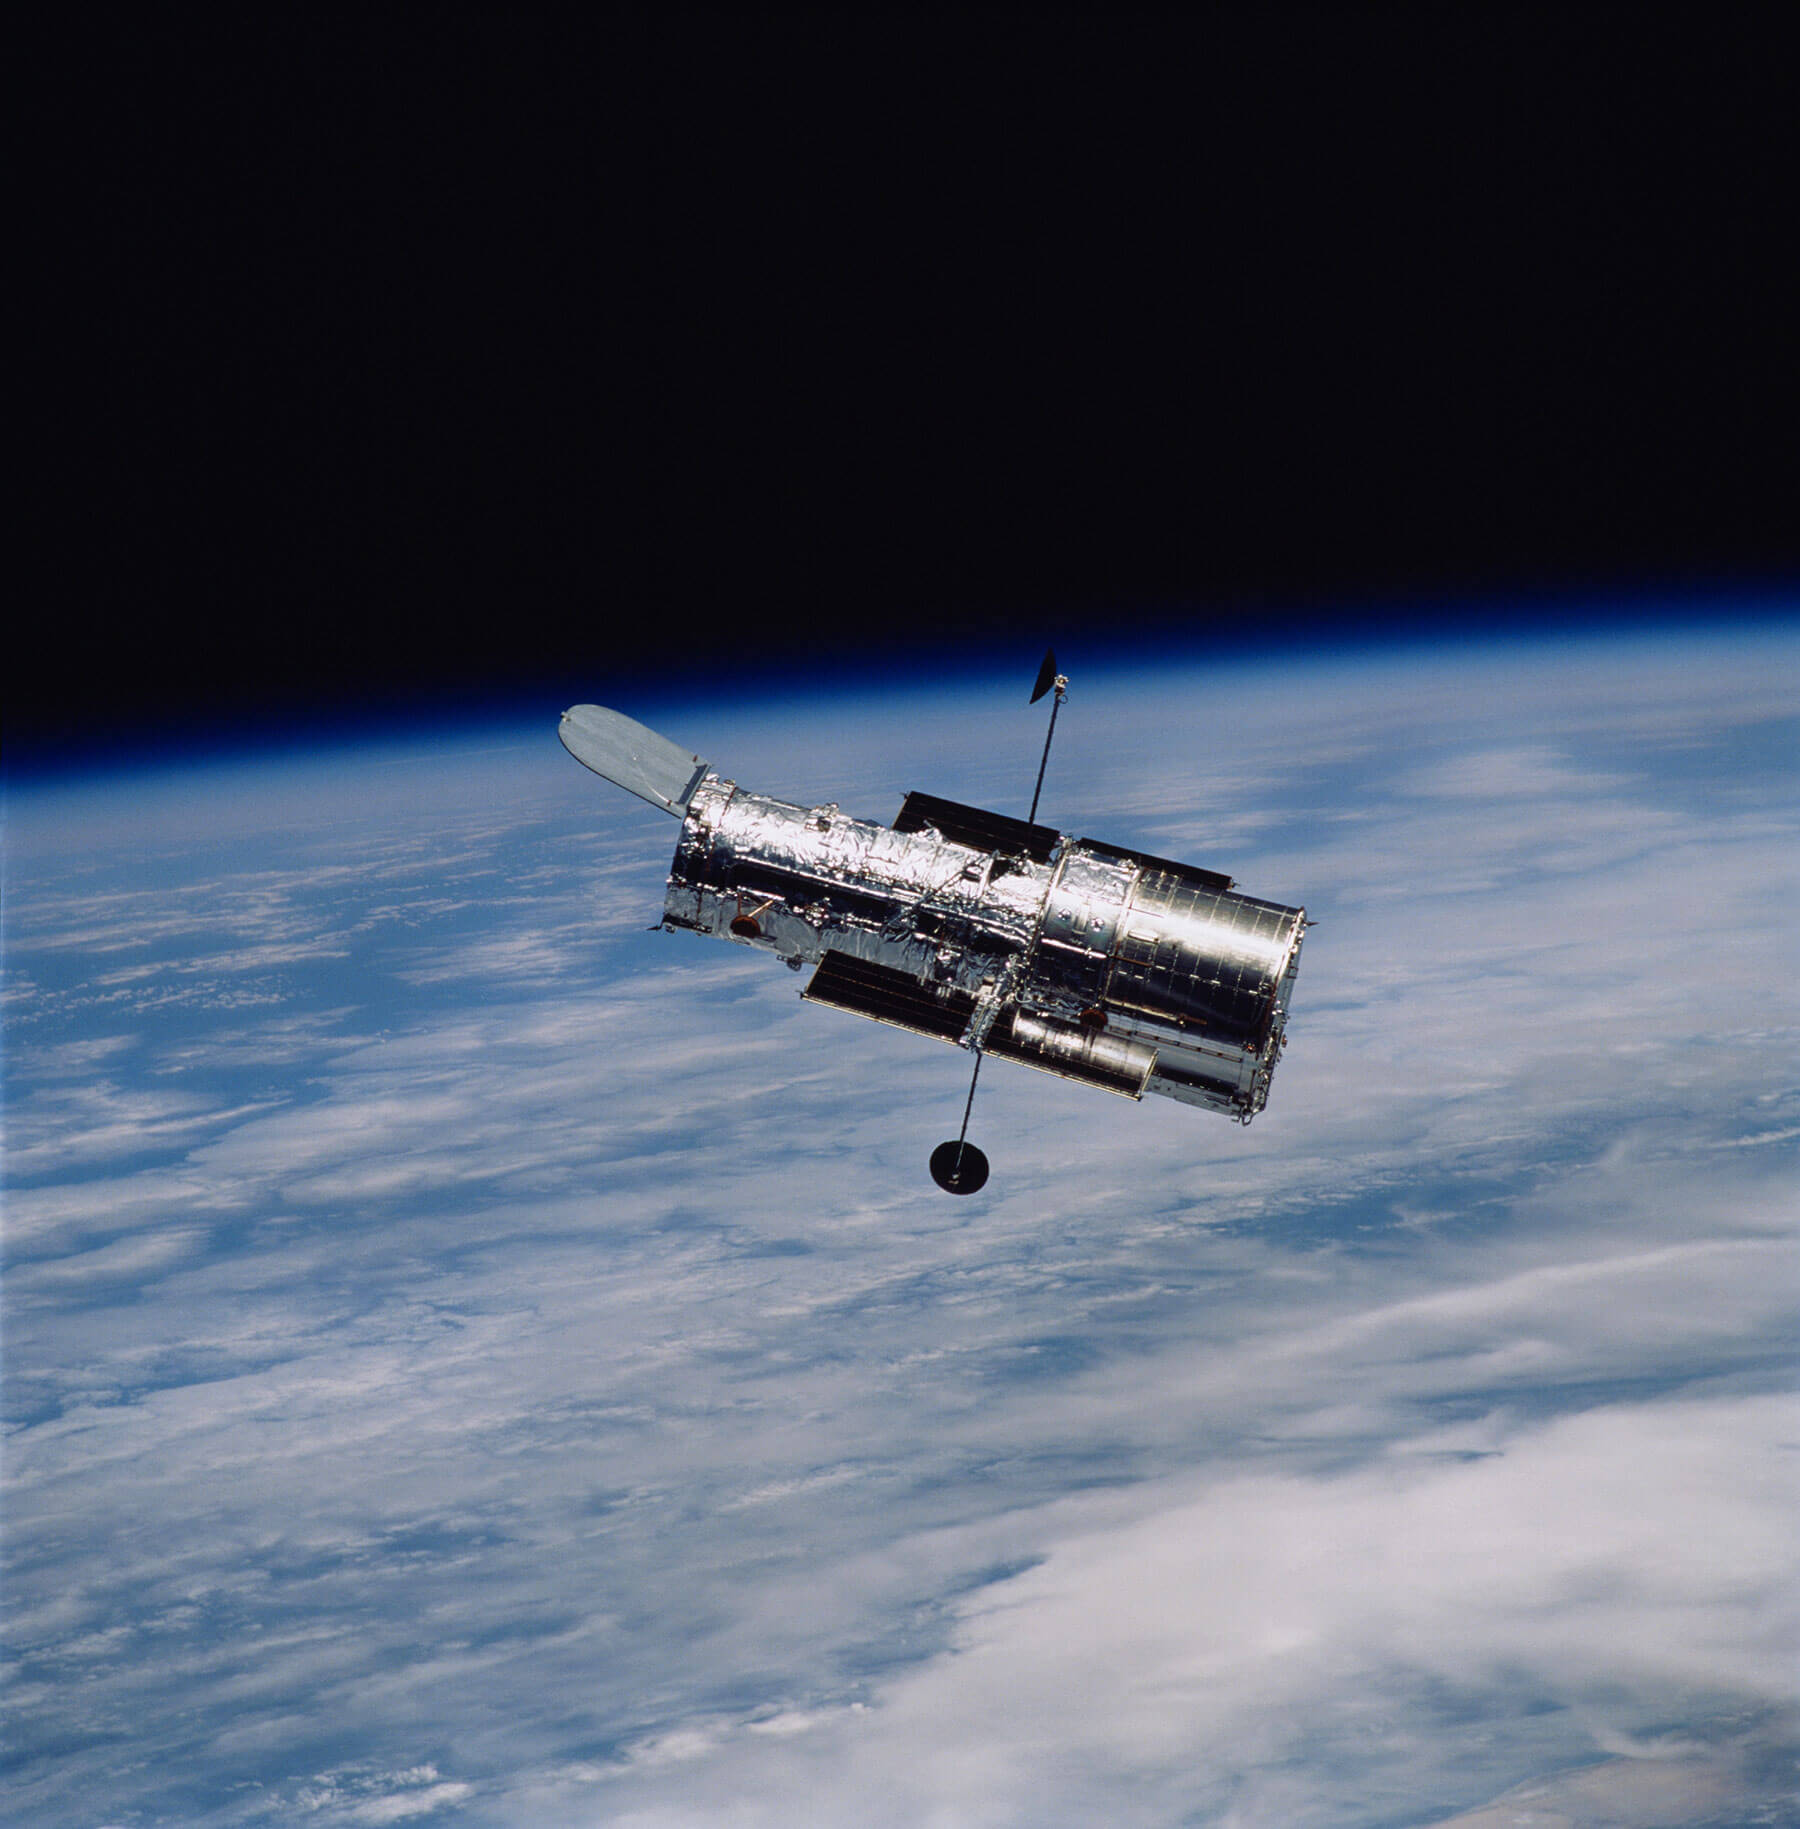 This is an image of the Hubble Space Telescope. A portion of Earth’s surface and horizon appear in the background. White wispy clouds can be seen intermittently covering Earth’s blue surface. The Hubble Space Telescope appears in the foreground. It is cylindrical in shape and has two antenna-like arms with a disc attached to each antenna’s end. The telescope itself is metallic gray and looks as if it is covered in aluminum foil.